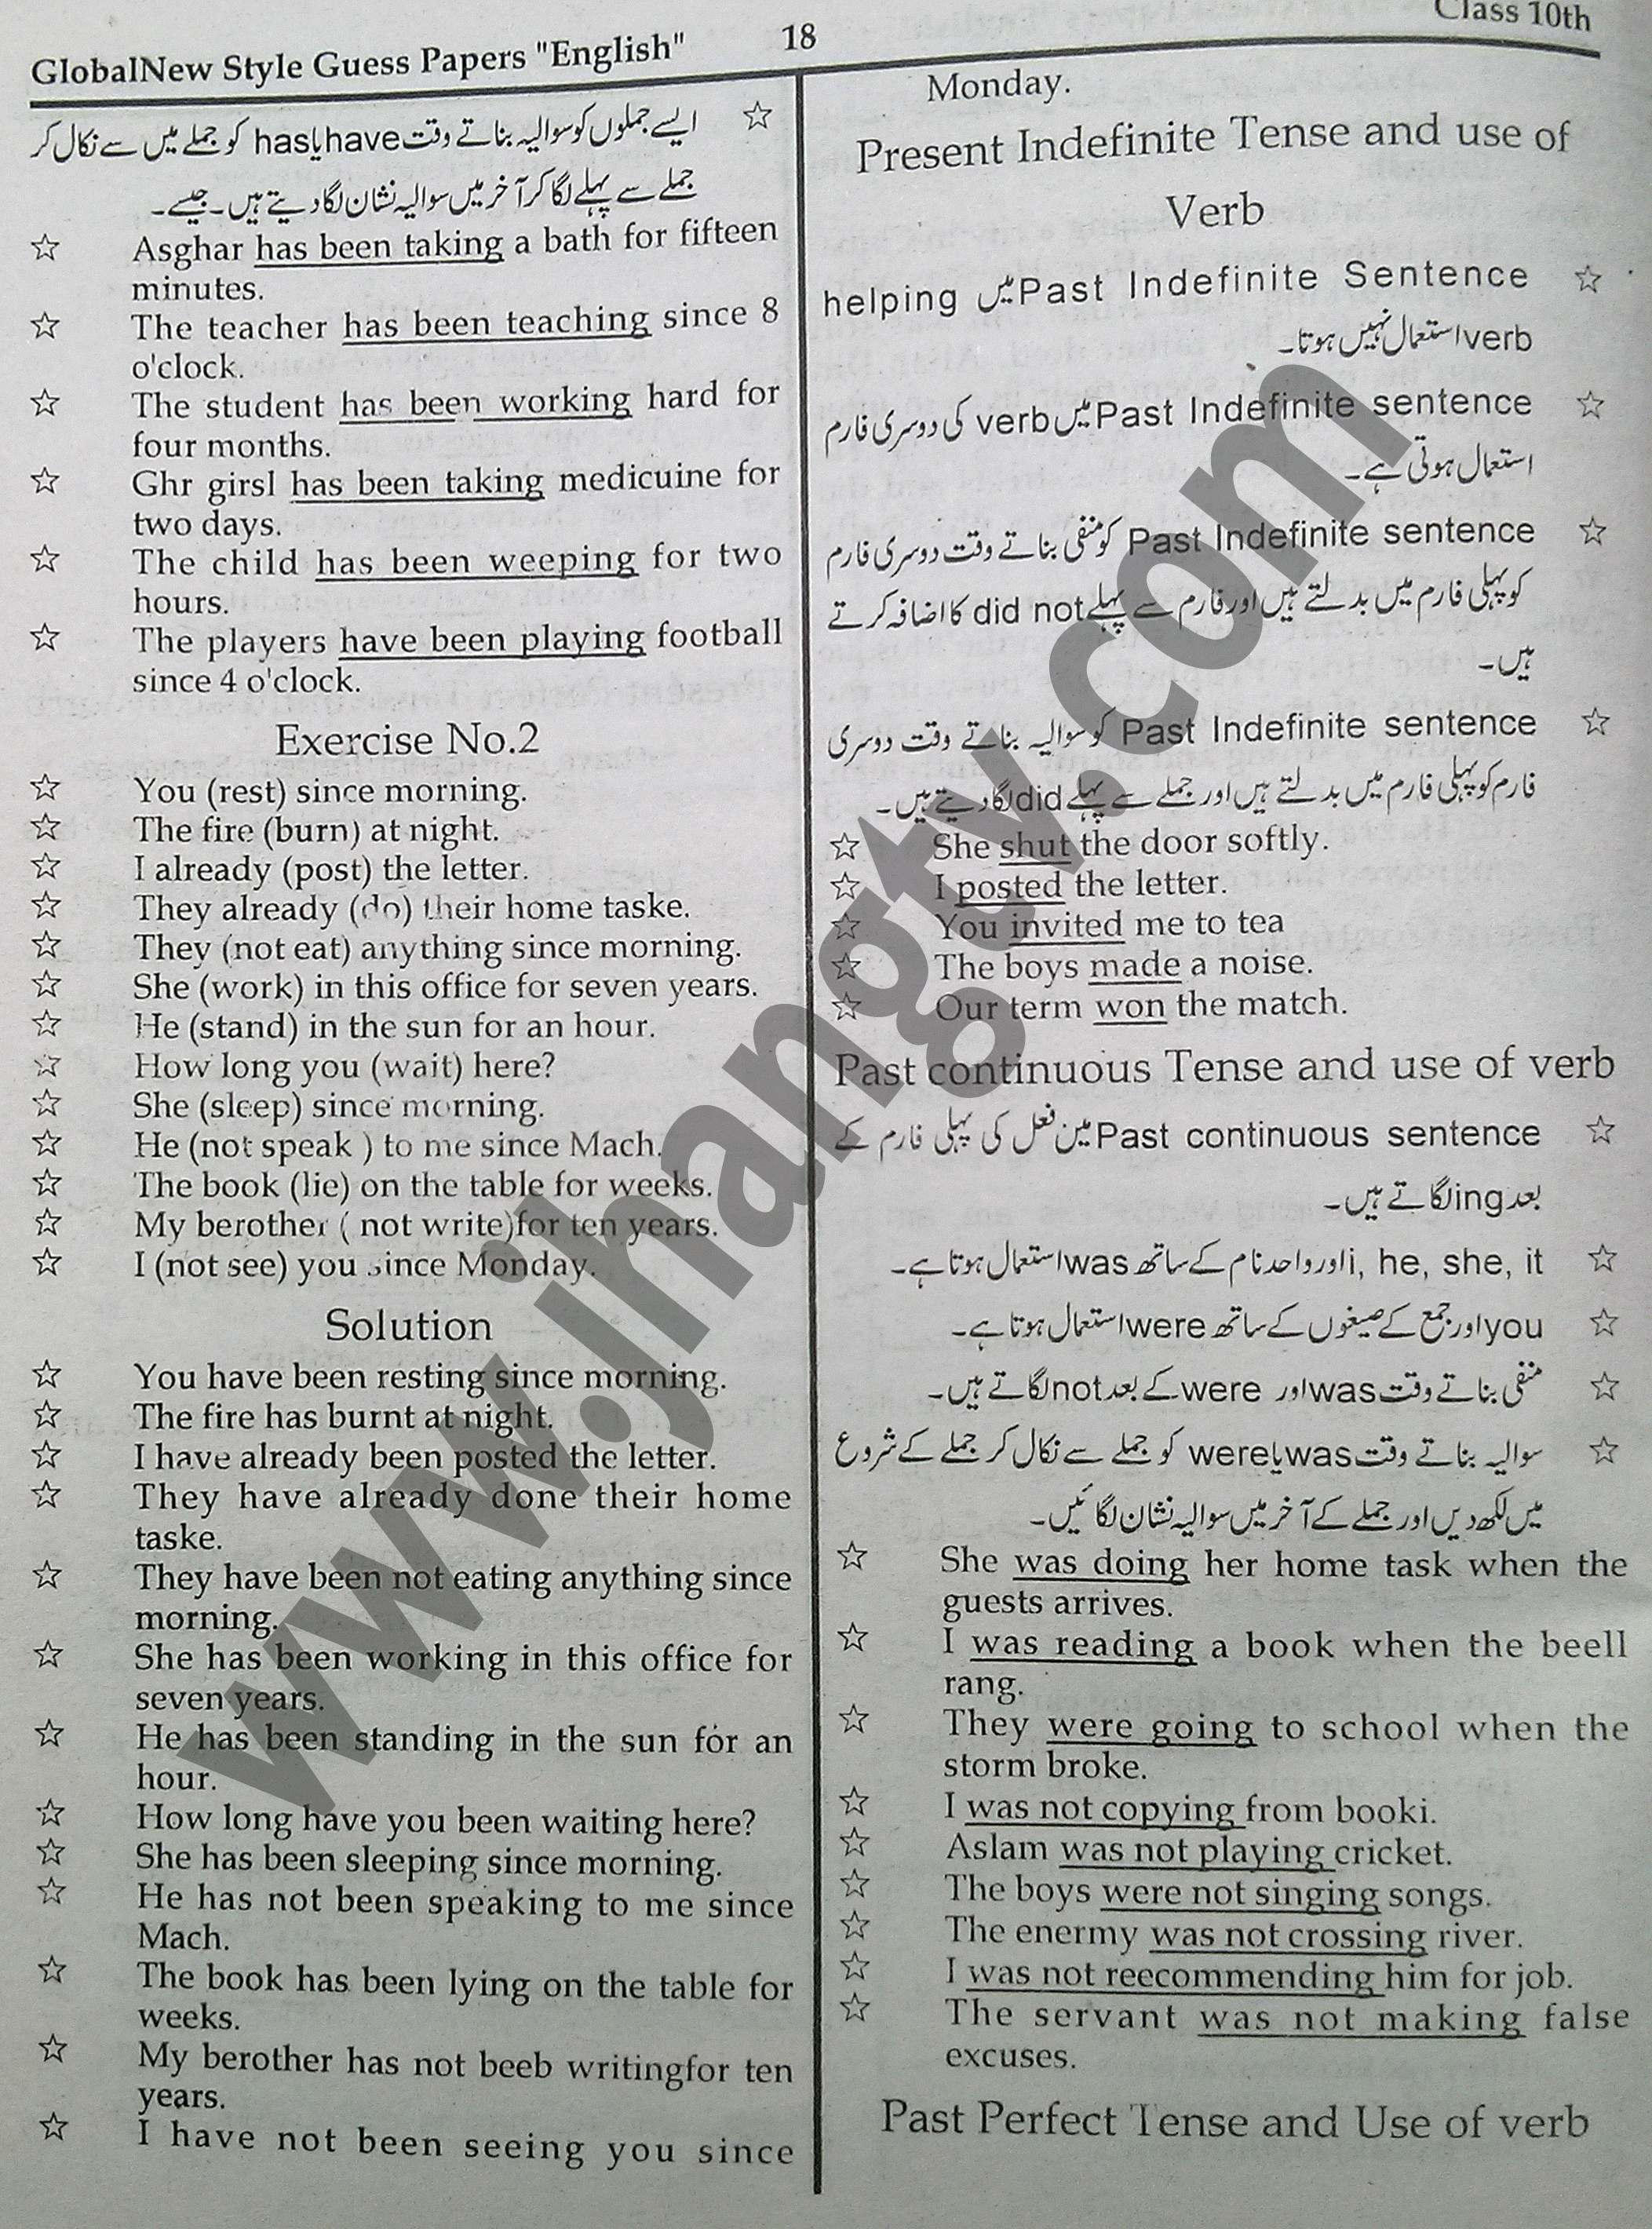 10th Class Guess Papers 2015 English (18)